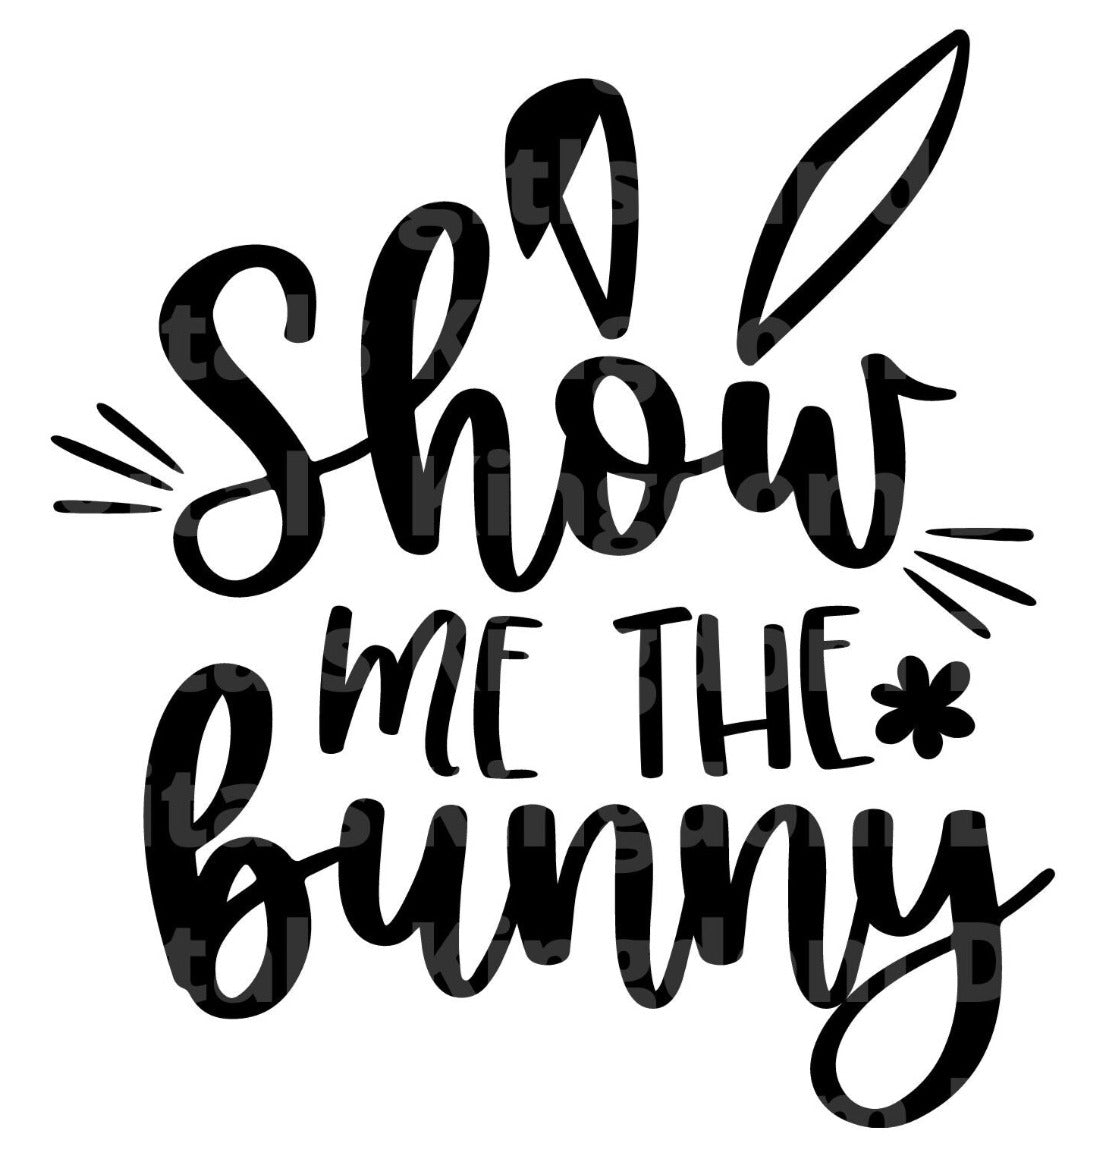 Show Me The Bunny